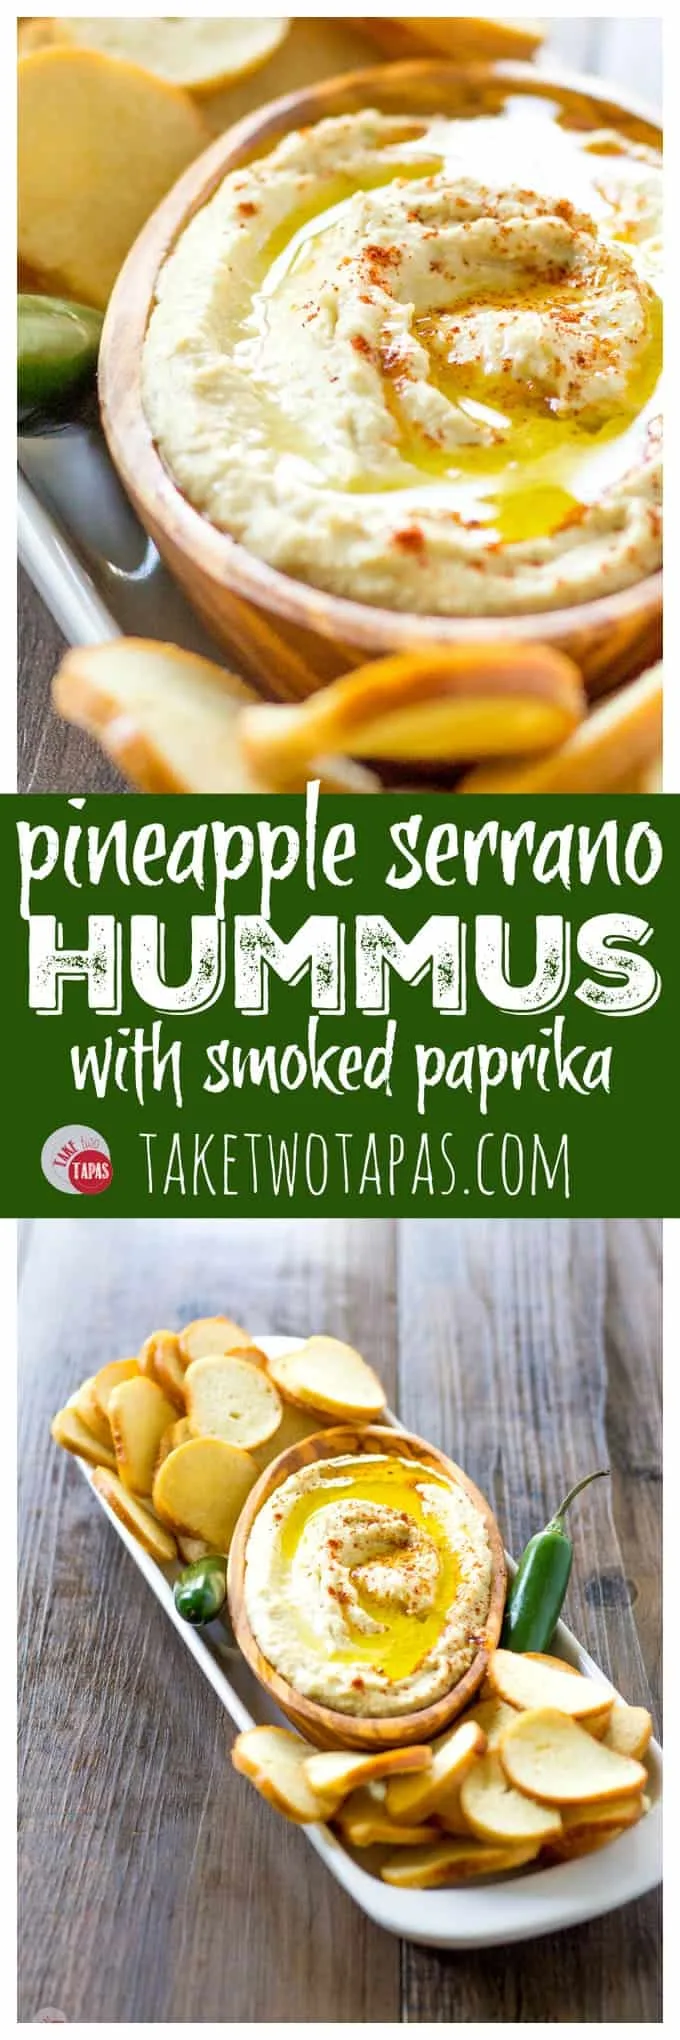 Pinterest collage image with text "pineapple serrano hummus with smoked paprika"